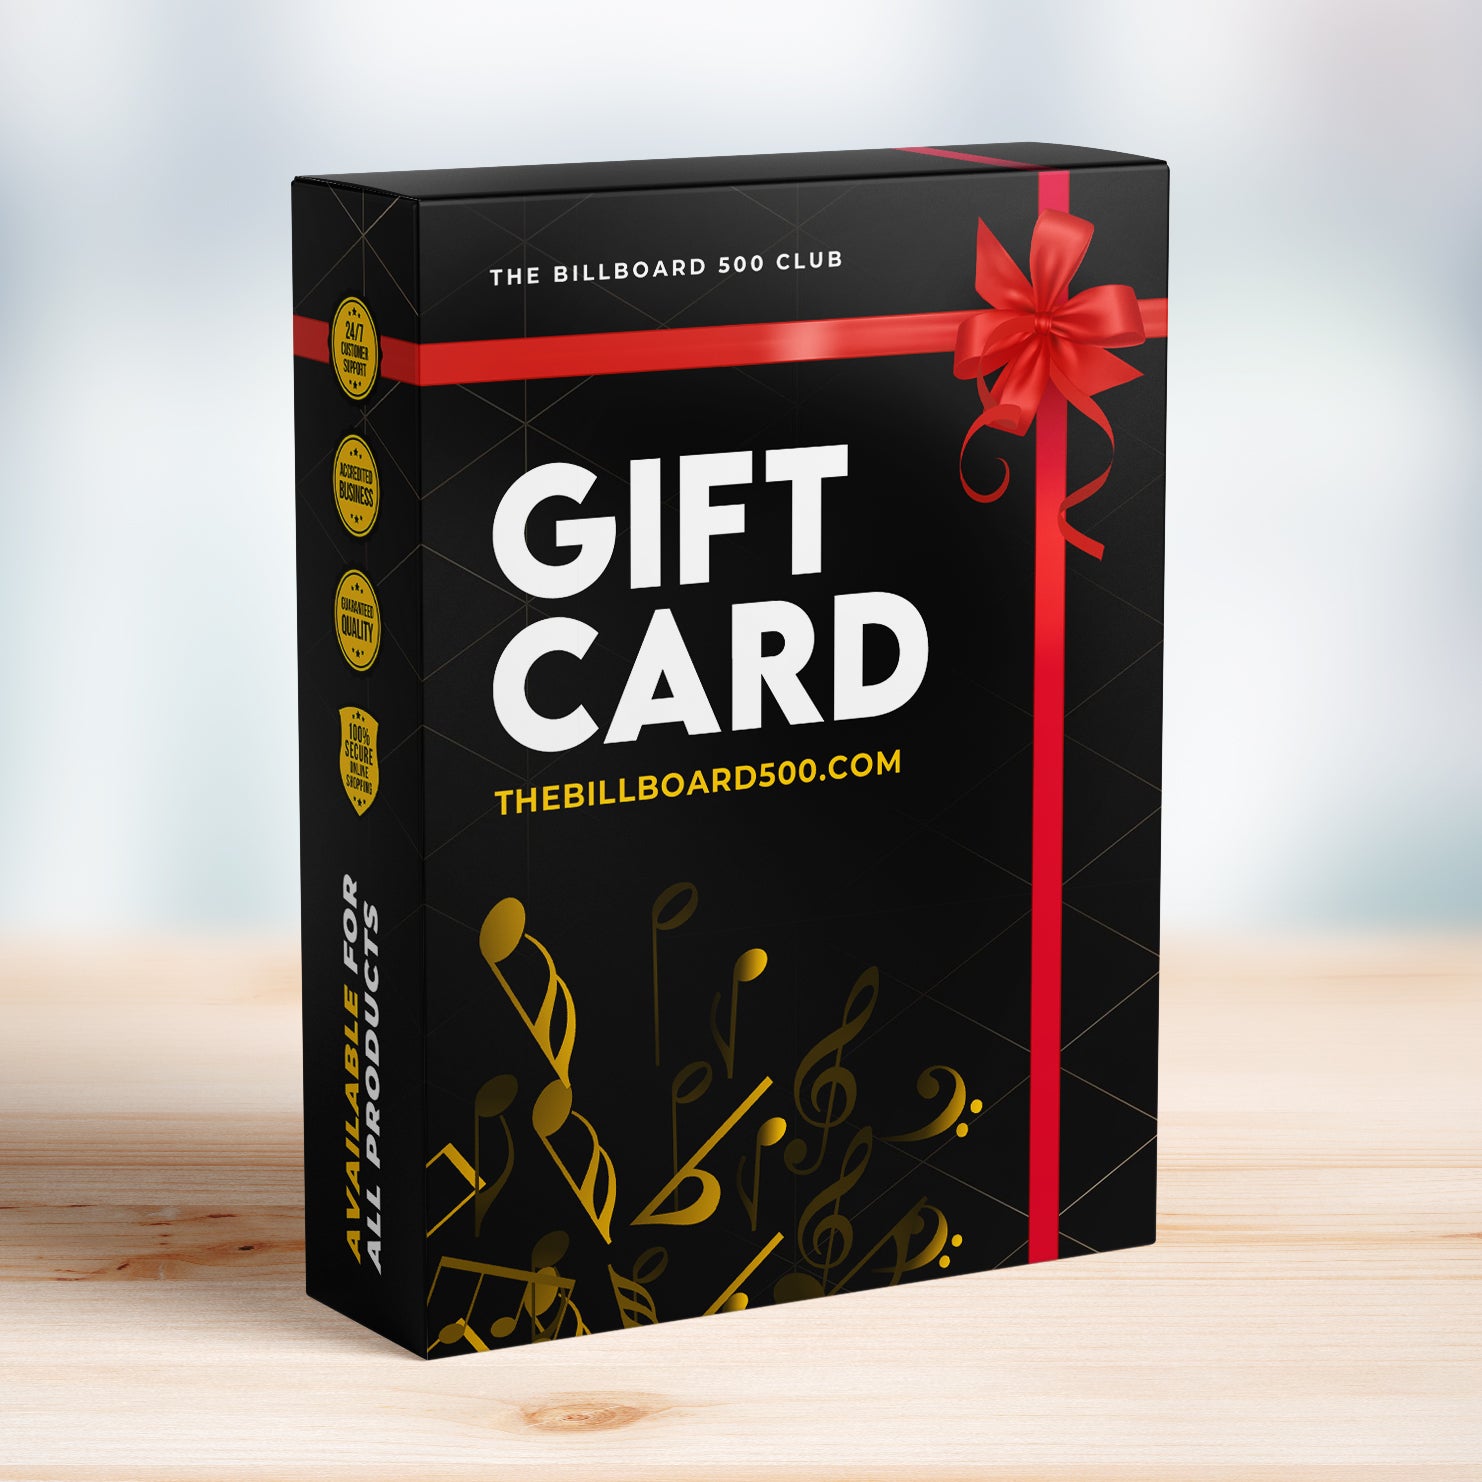 Give a Gift Card (Select From $25 - $3,000) - The Billboard 500 Club